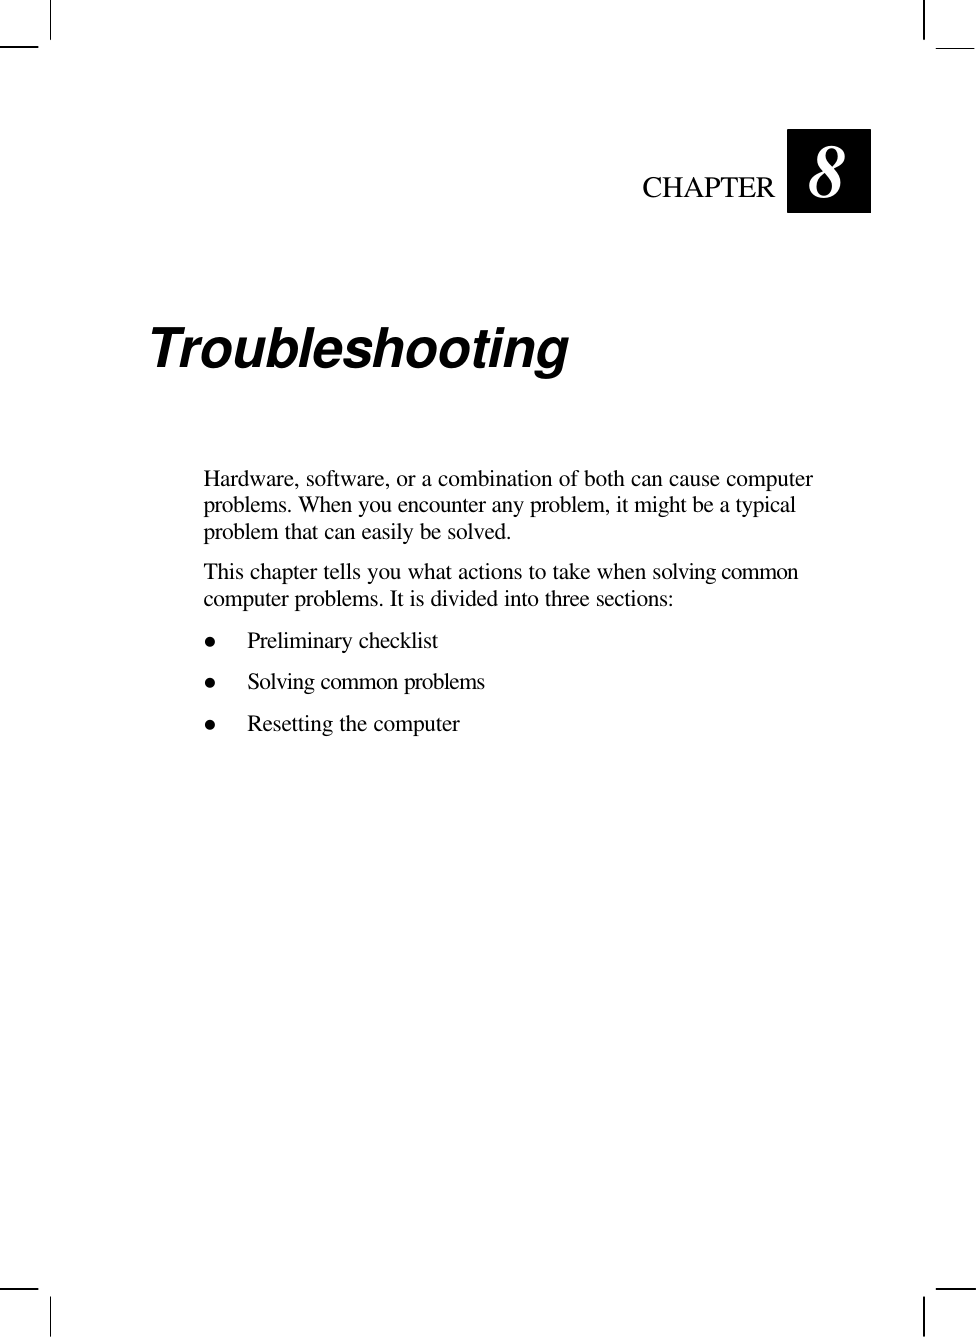   CHAPTER 8 Troubleshooting Hardware, software, or a combination of both can cause computer problems. When you encounter any problem, it might be a typical problem that can easily be solved. This chapter tells you what actions to take when solving common computer problems. It is divided into three sections: l Preliminary checklist l Solving common problems l Resetting the computer 